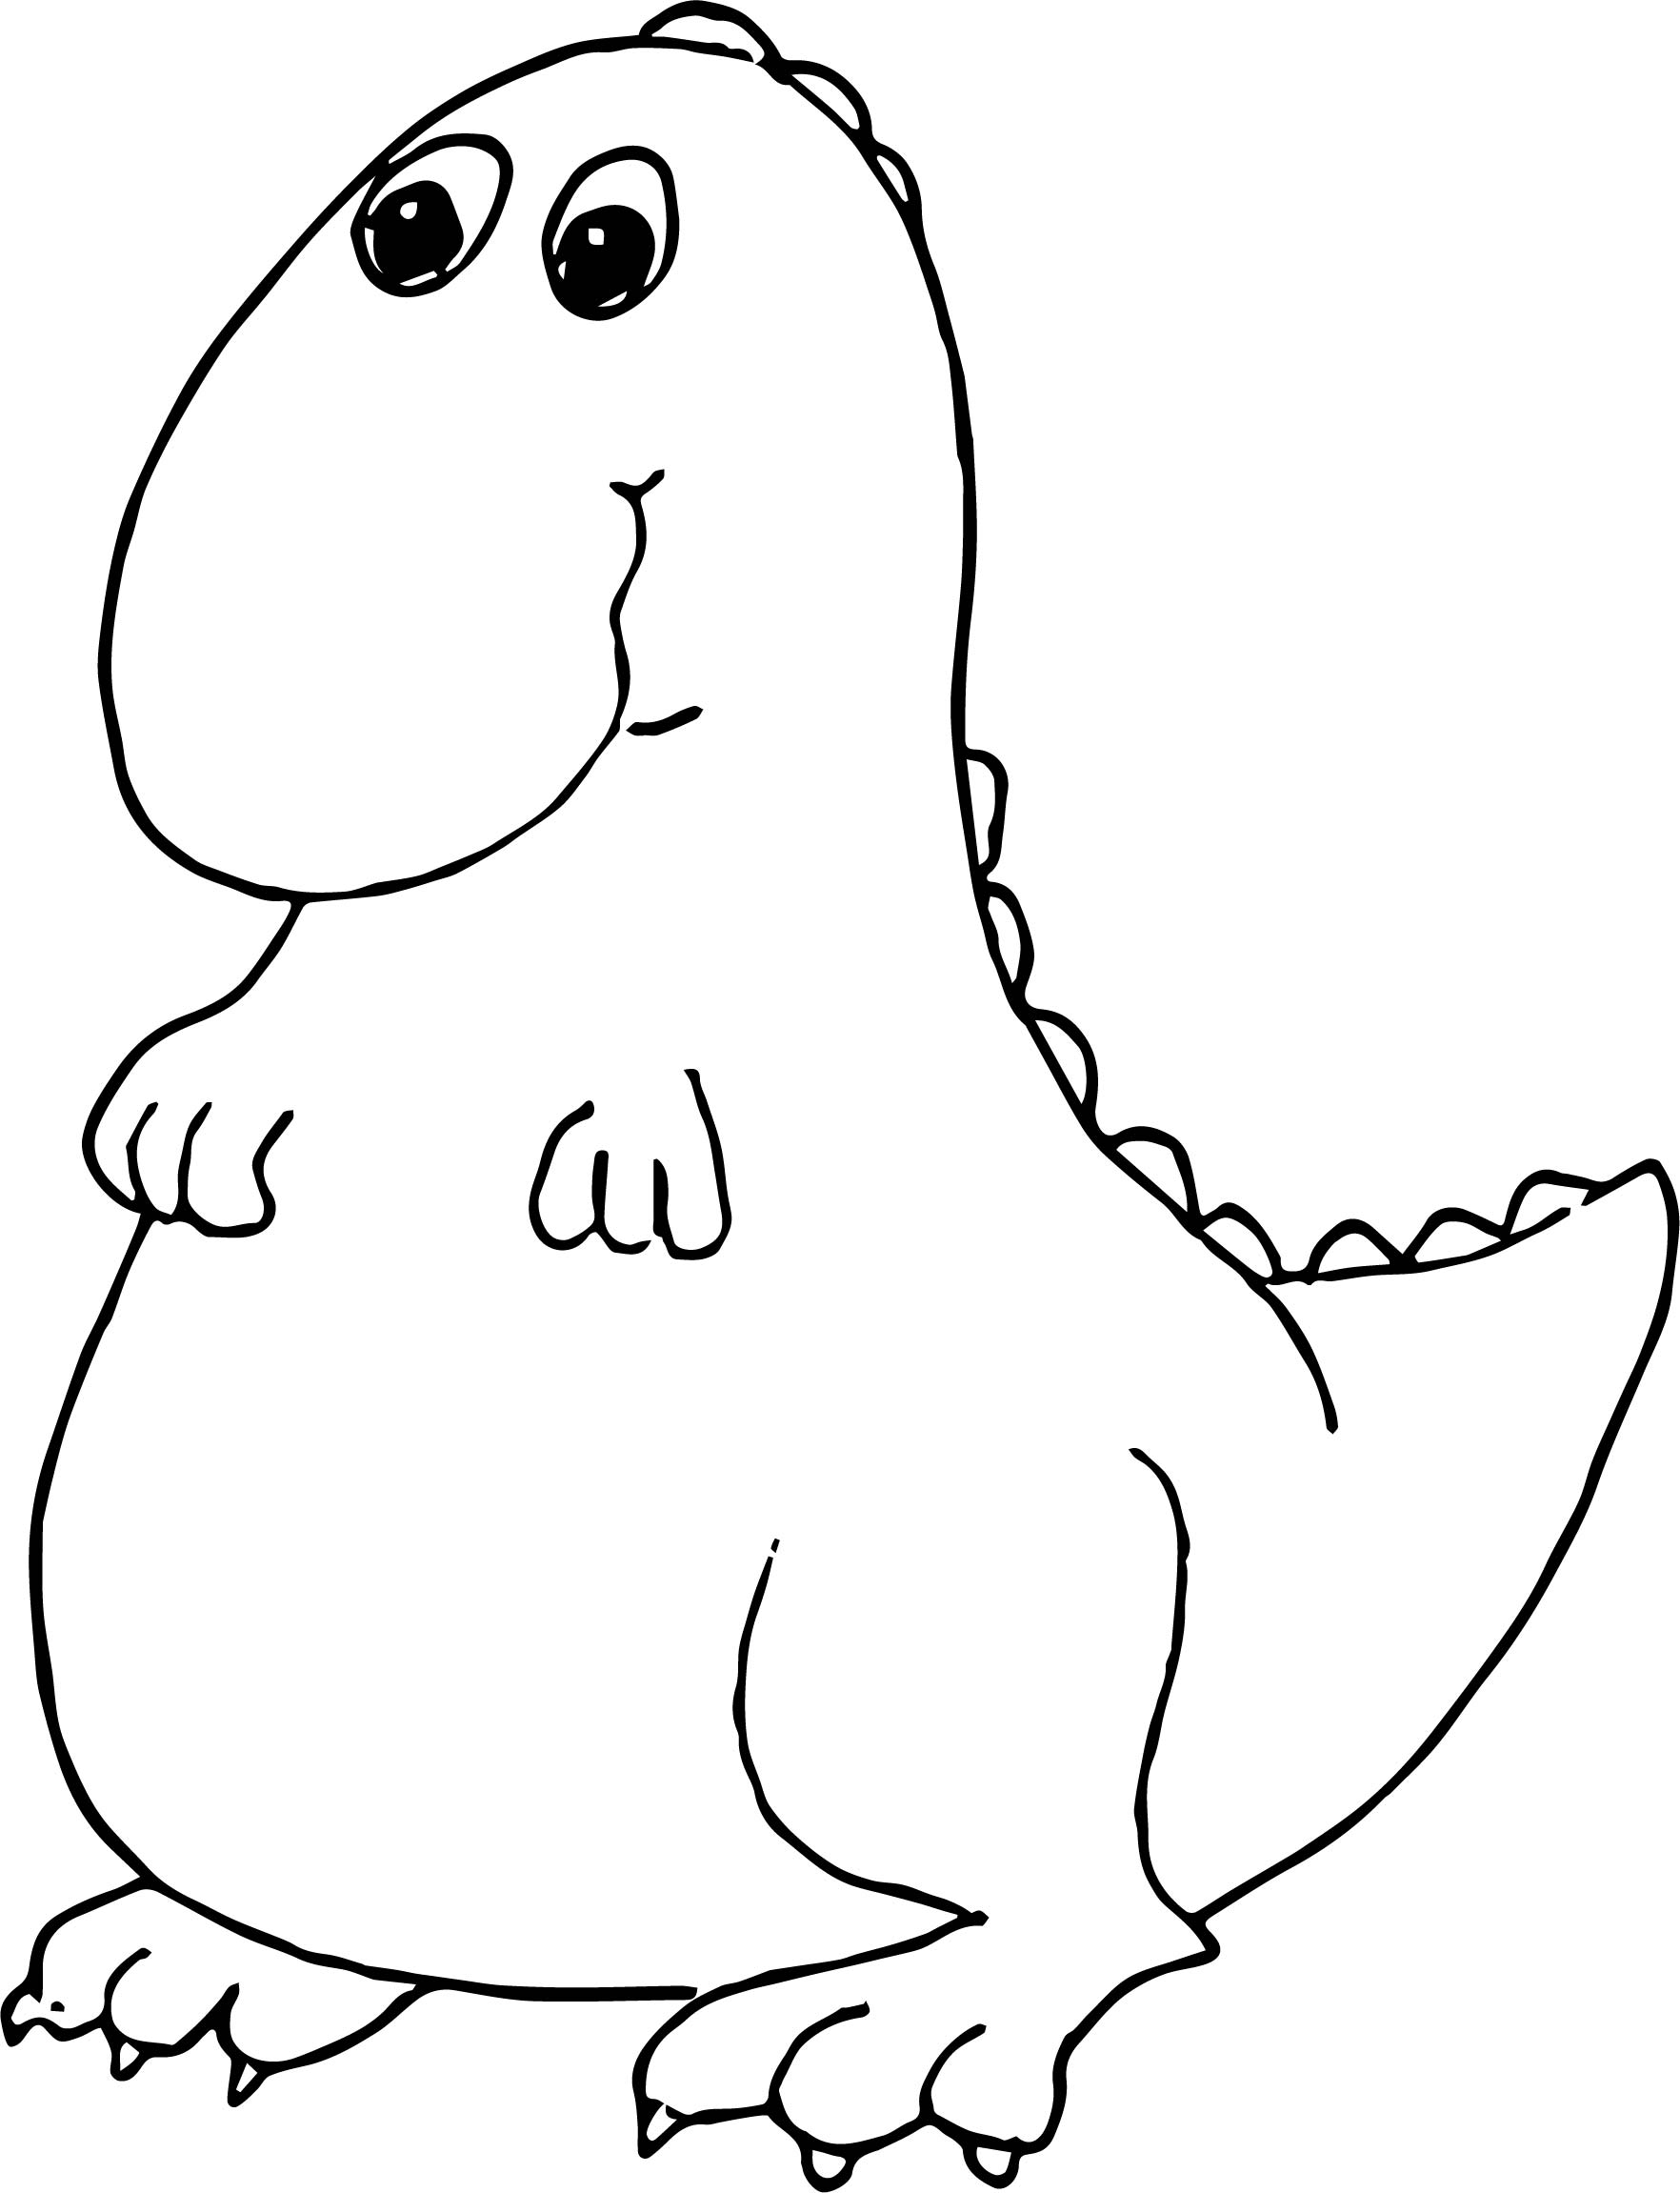 cute baby dinosaur coloring pages cute dinosaur with tooth necklace coloring page free dinosaur pages baby coloring cute 